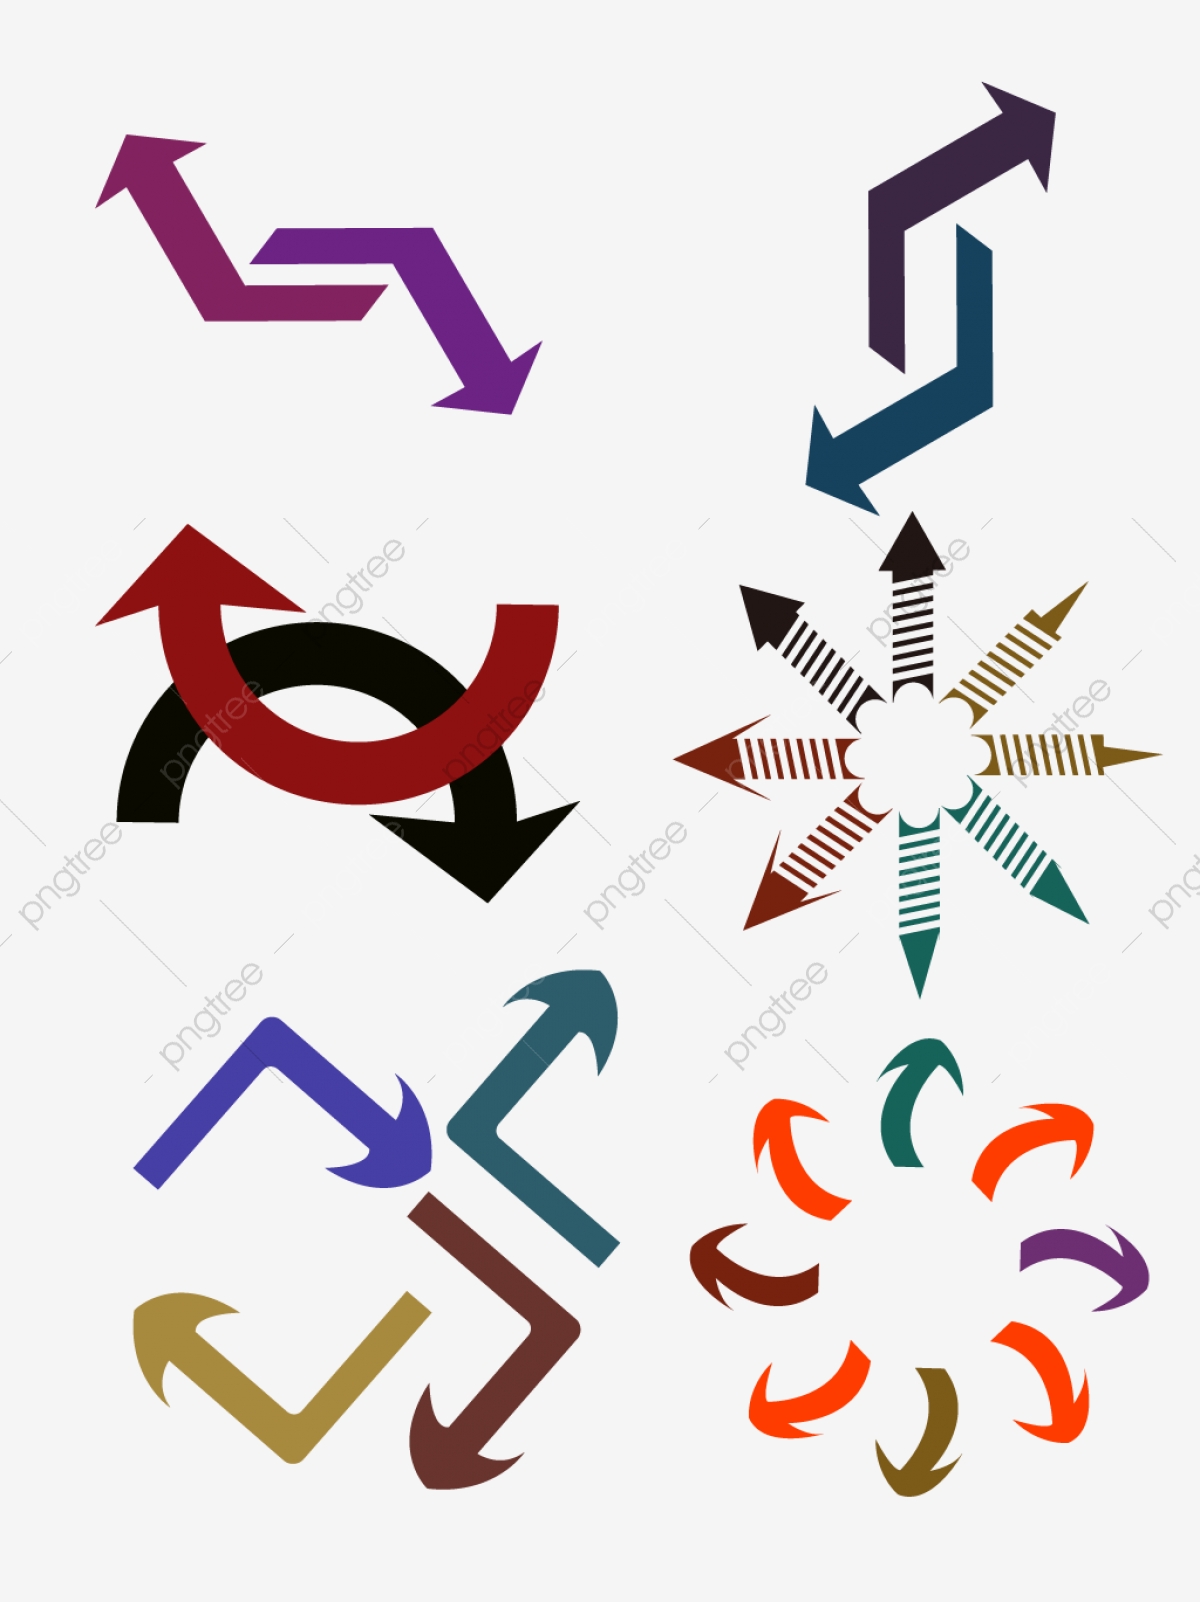 Download Rotate Arrow Vector at Vectorified.com | Collection of ...